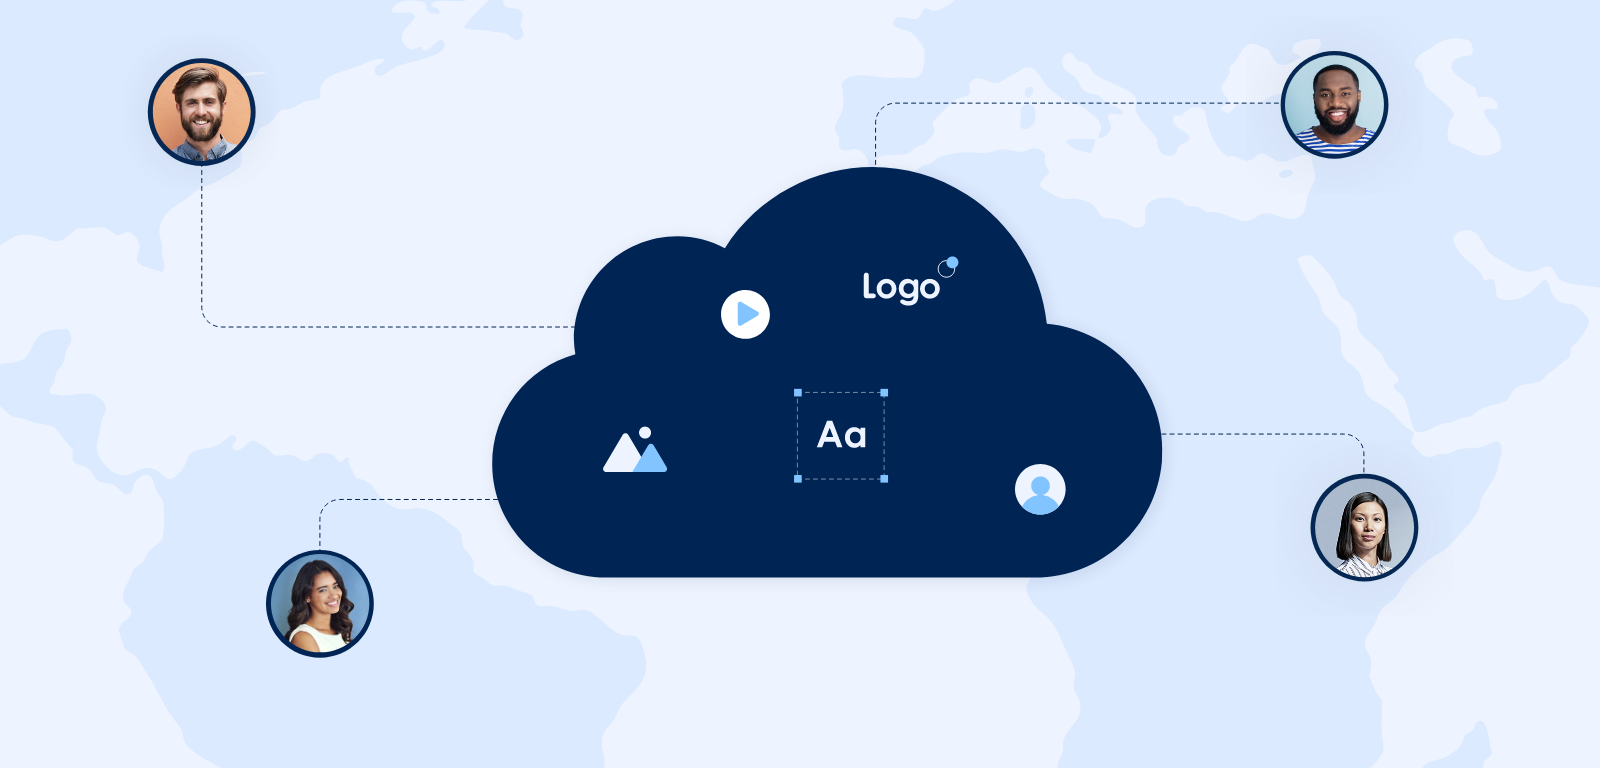 Dark blue digital cloud with icons connecting to it